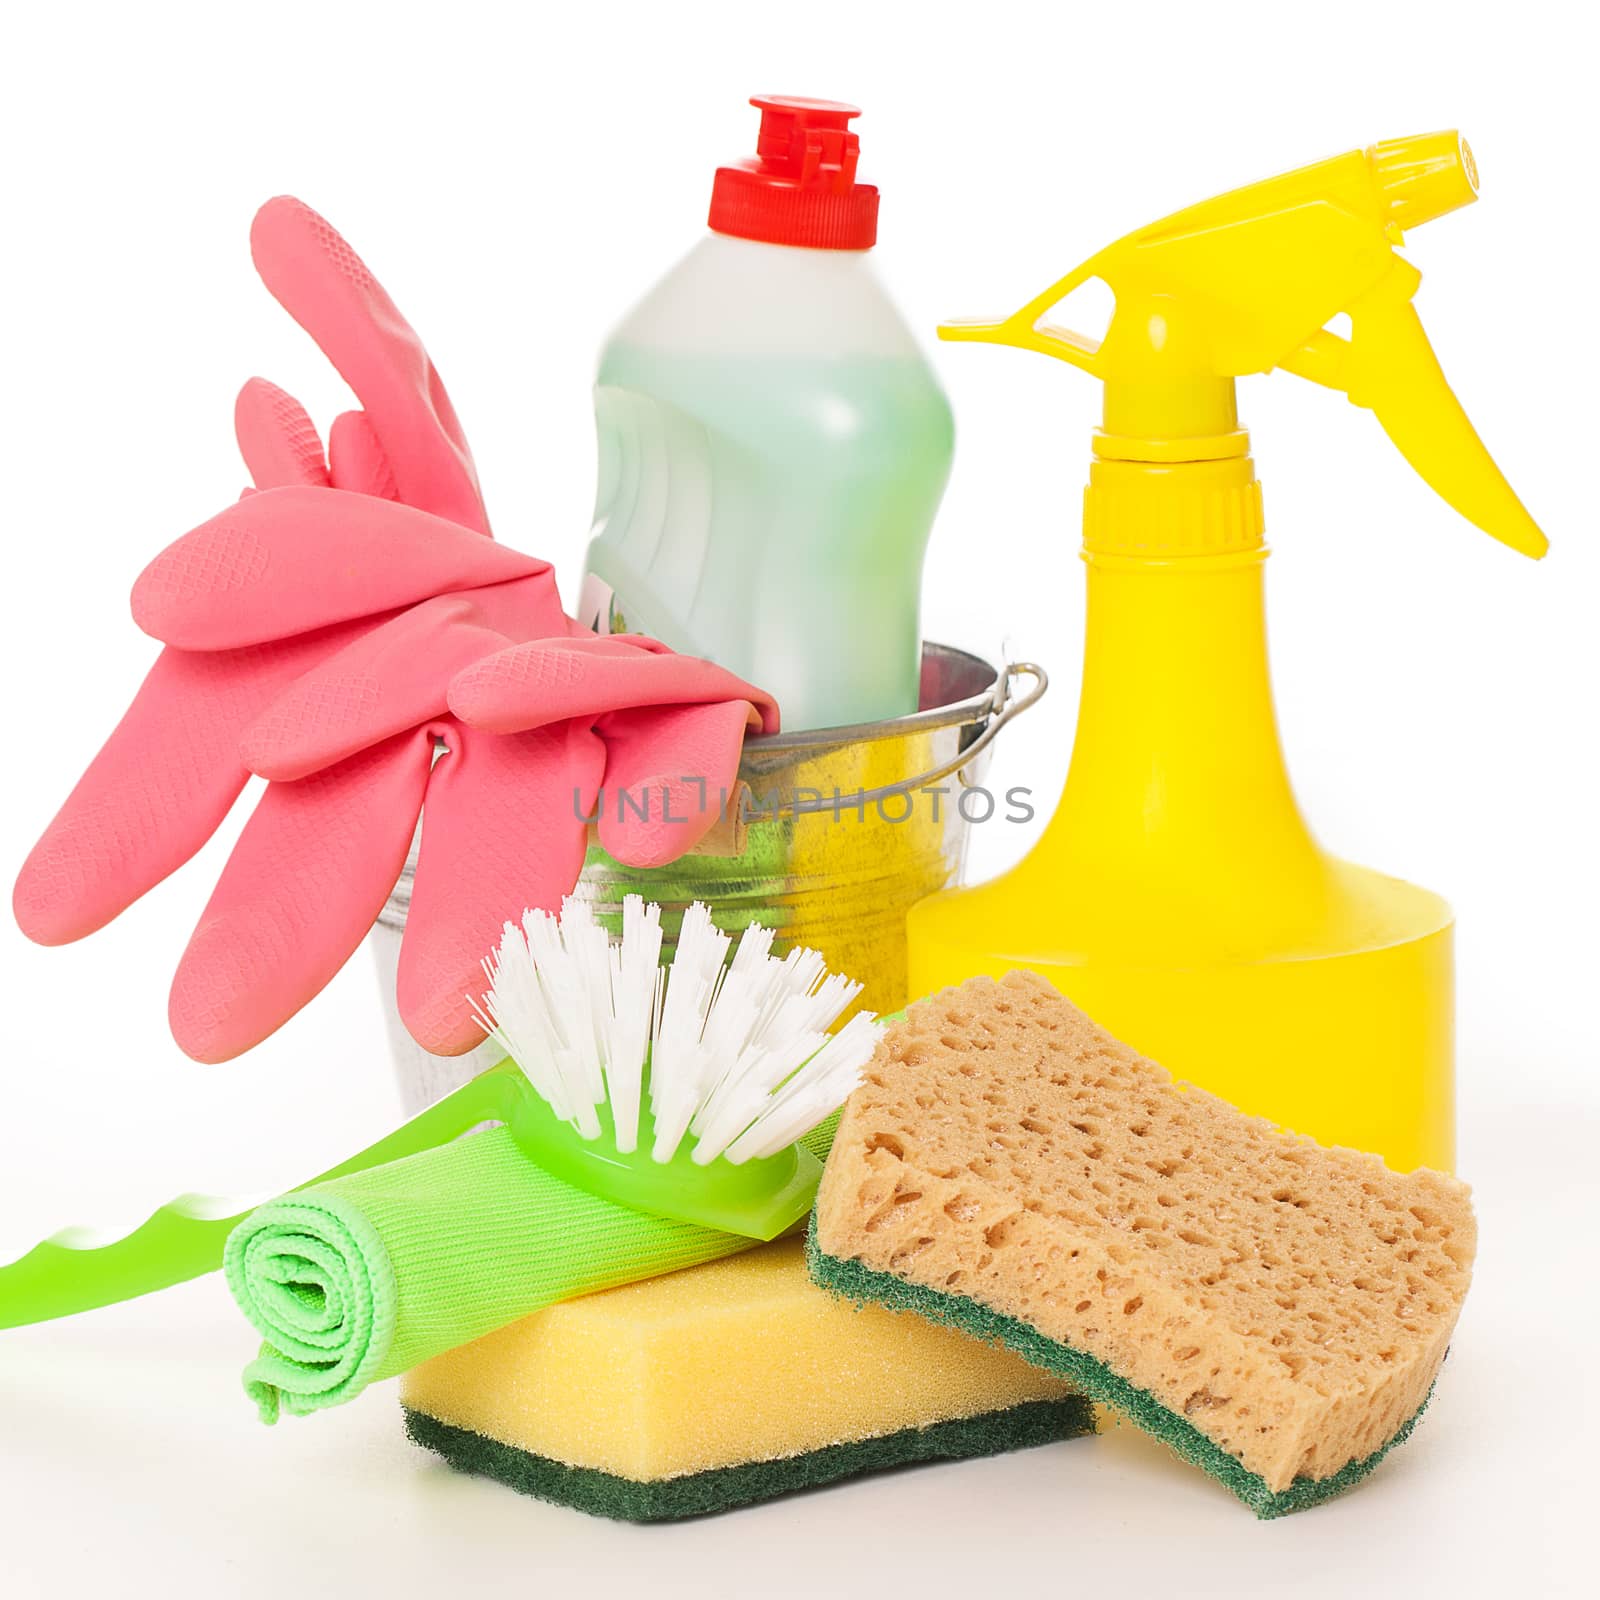 Bright colorful cleaning set on a background by rufatjumali